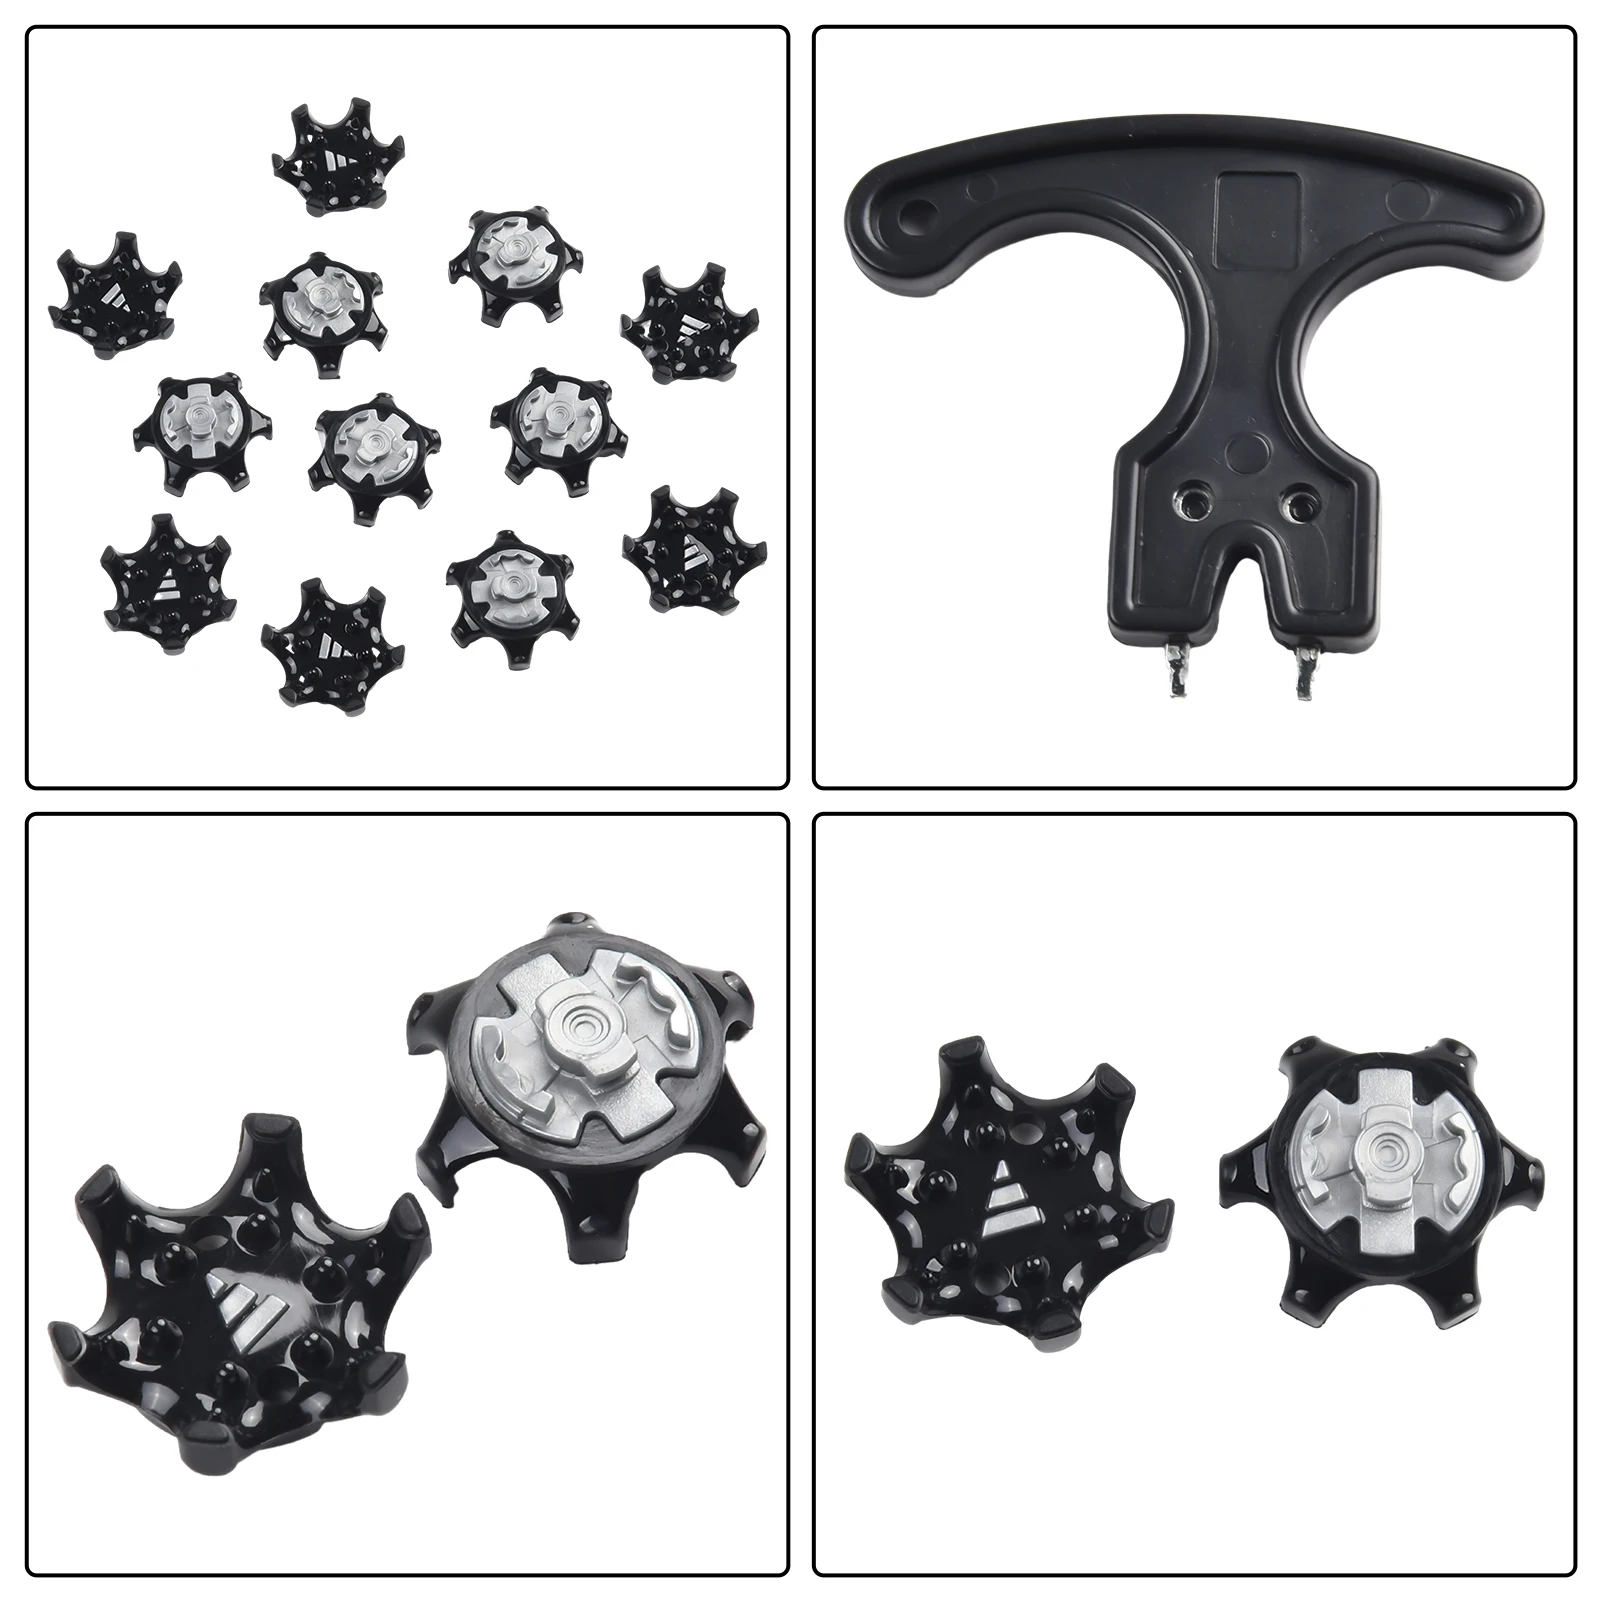 30pcs Golf Shoe Spikes Replace Clamp Cleat Screw-in Removal Tools Plastic Black Golf Supply Part For Superior Comfort Durability